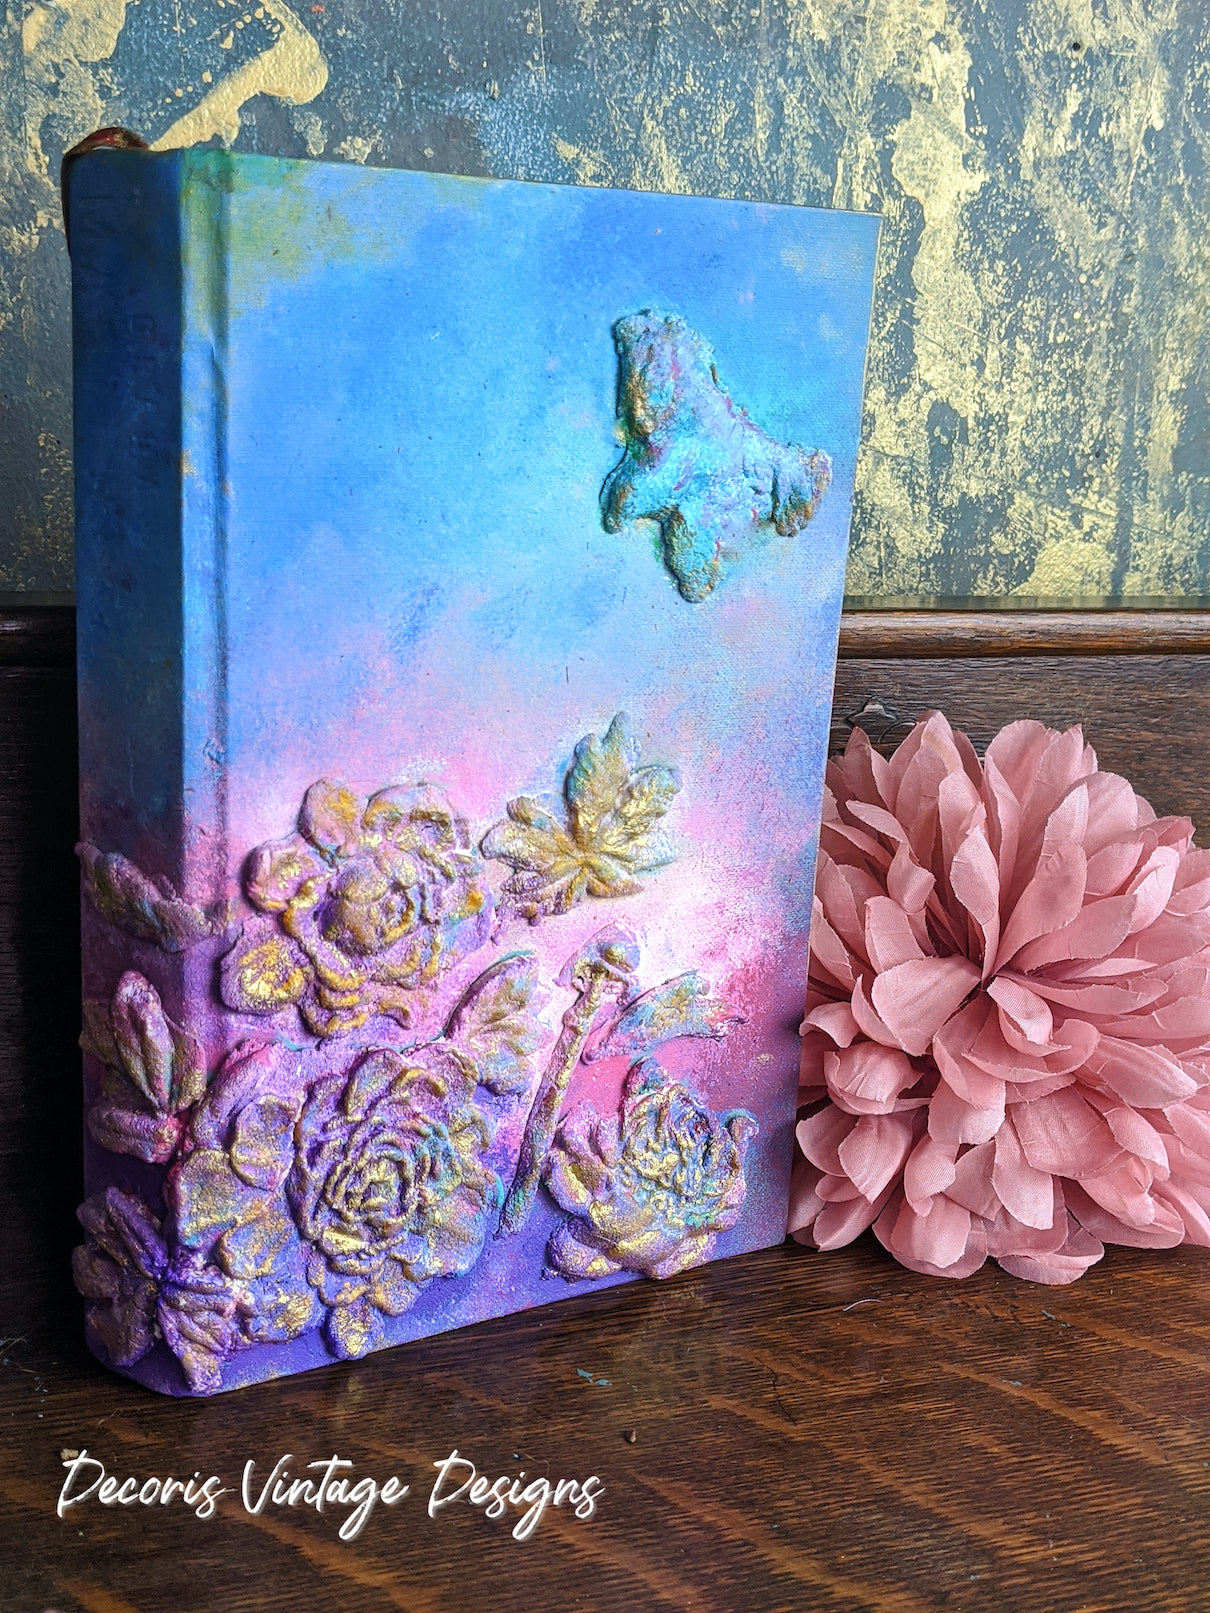 WILDERNESS ROSE - Silicone Mold - Redesign with Prima Flower Mold -  Silicone Floral Decor Mould - Wilderness Rose5x8 - The Plaster Paint  Company, LLC